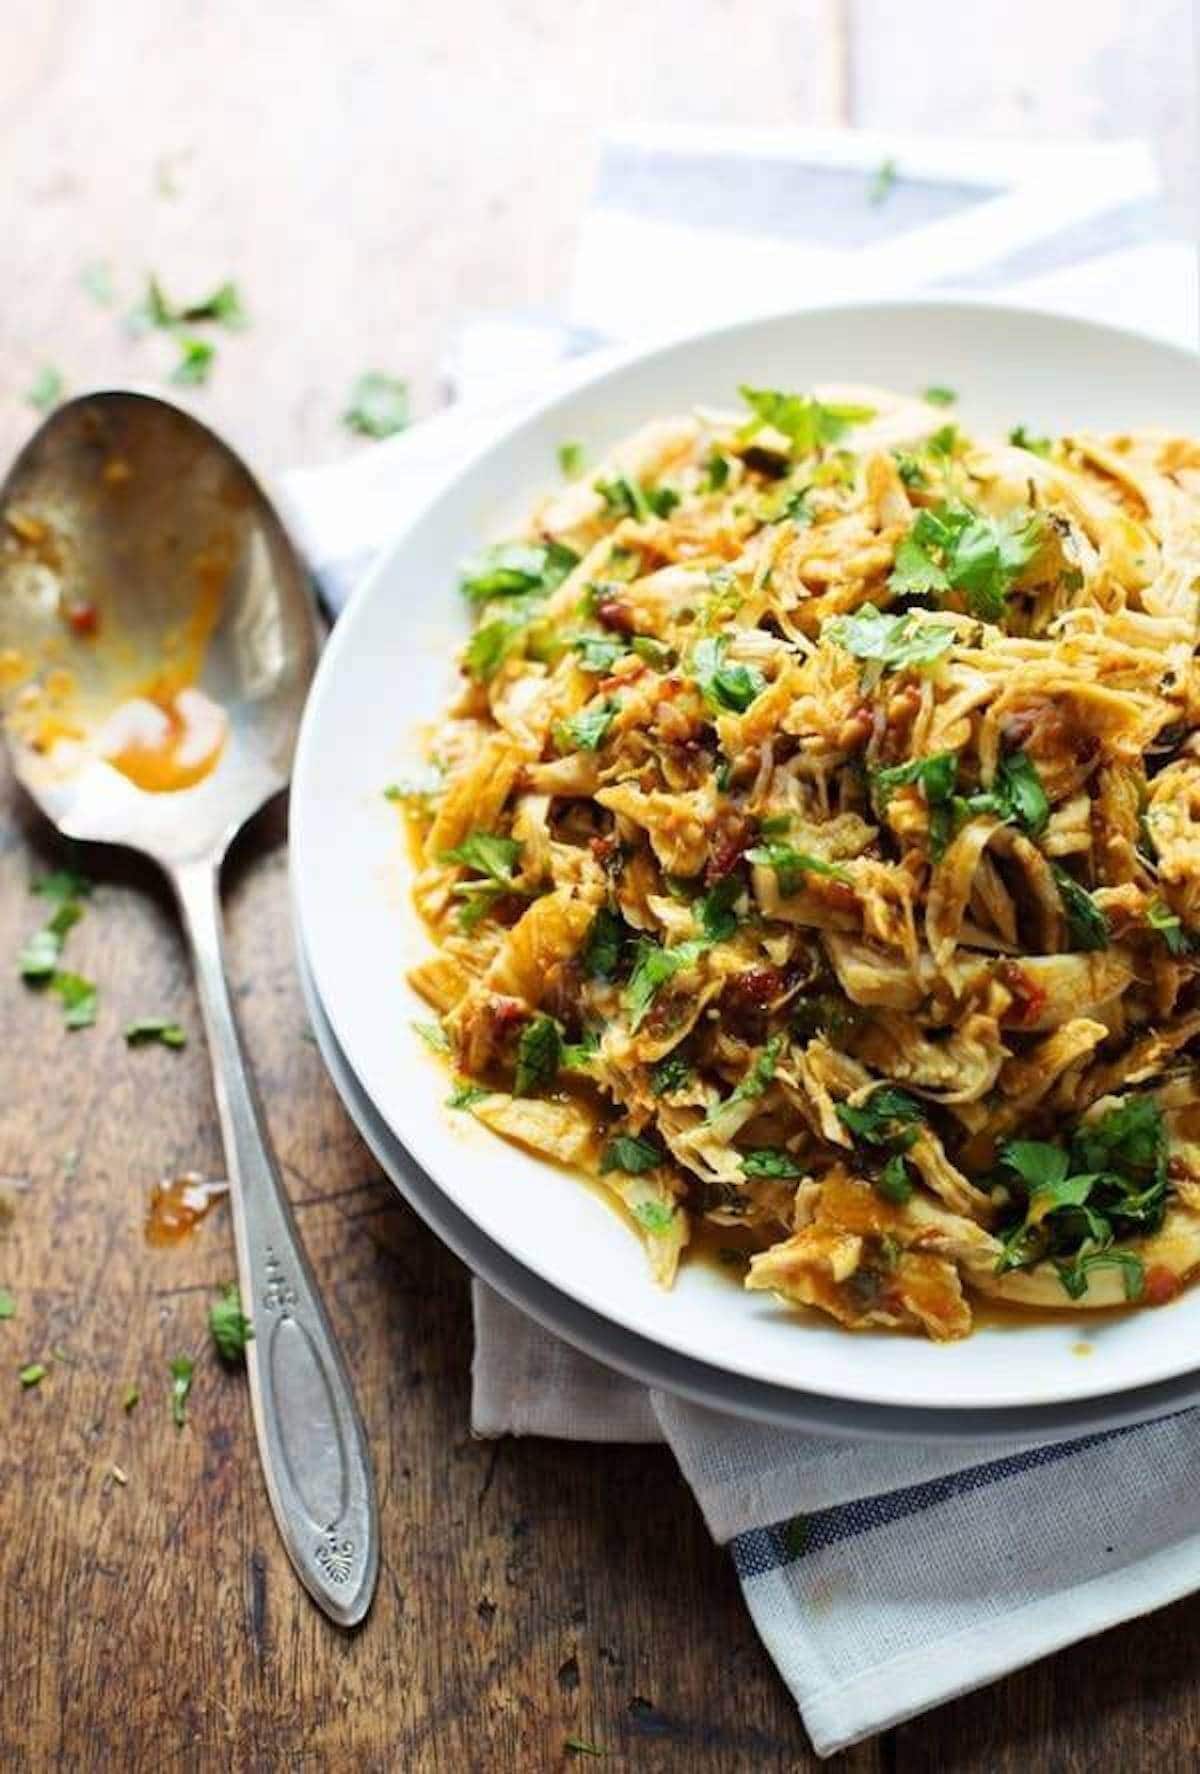 Spicy Chipotle shredded chicken in bowl with serving spoon.